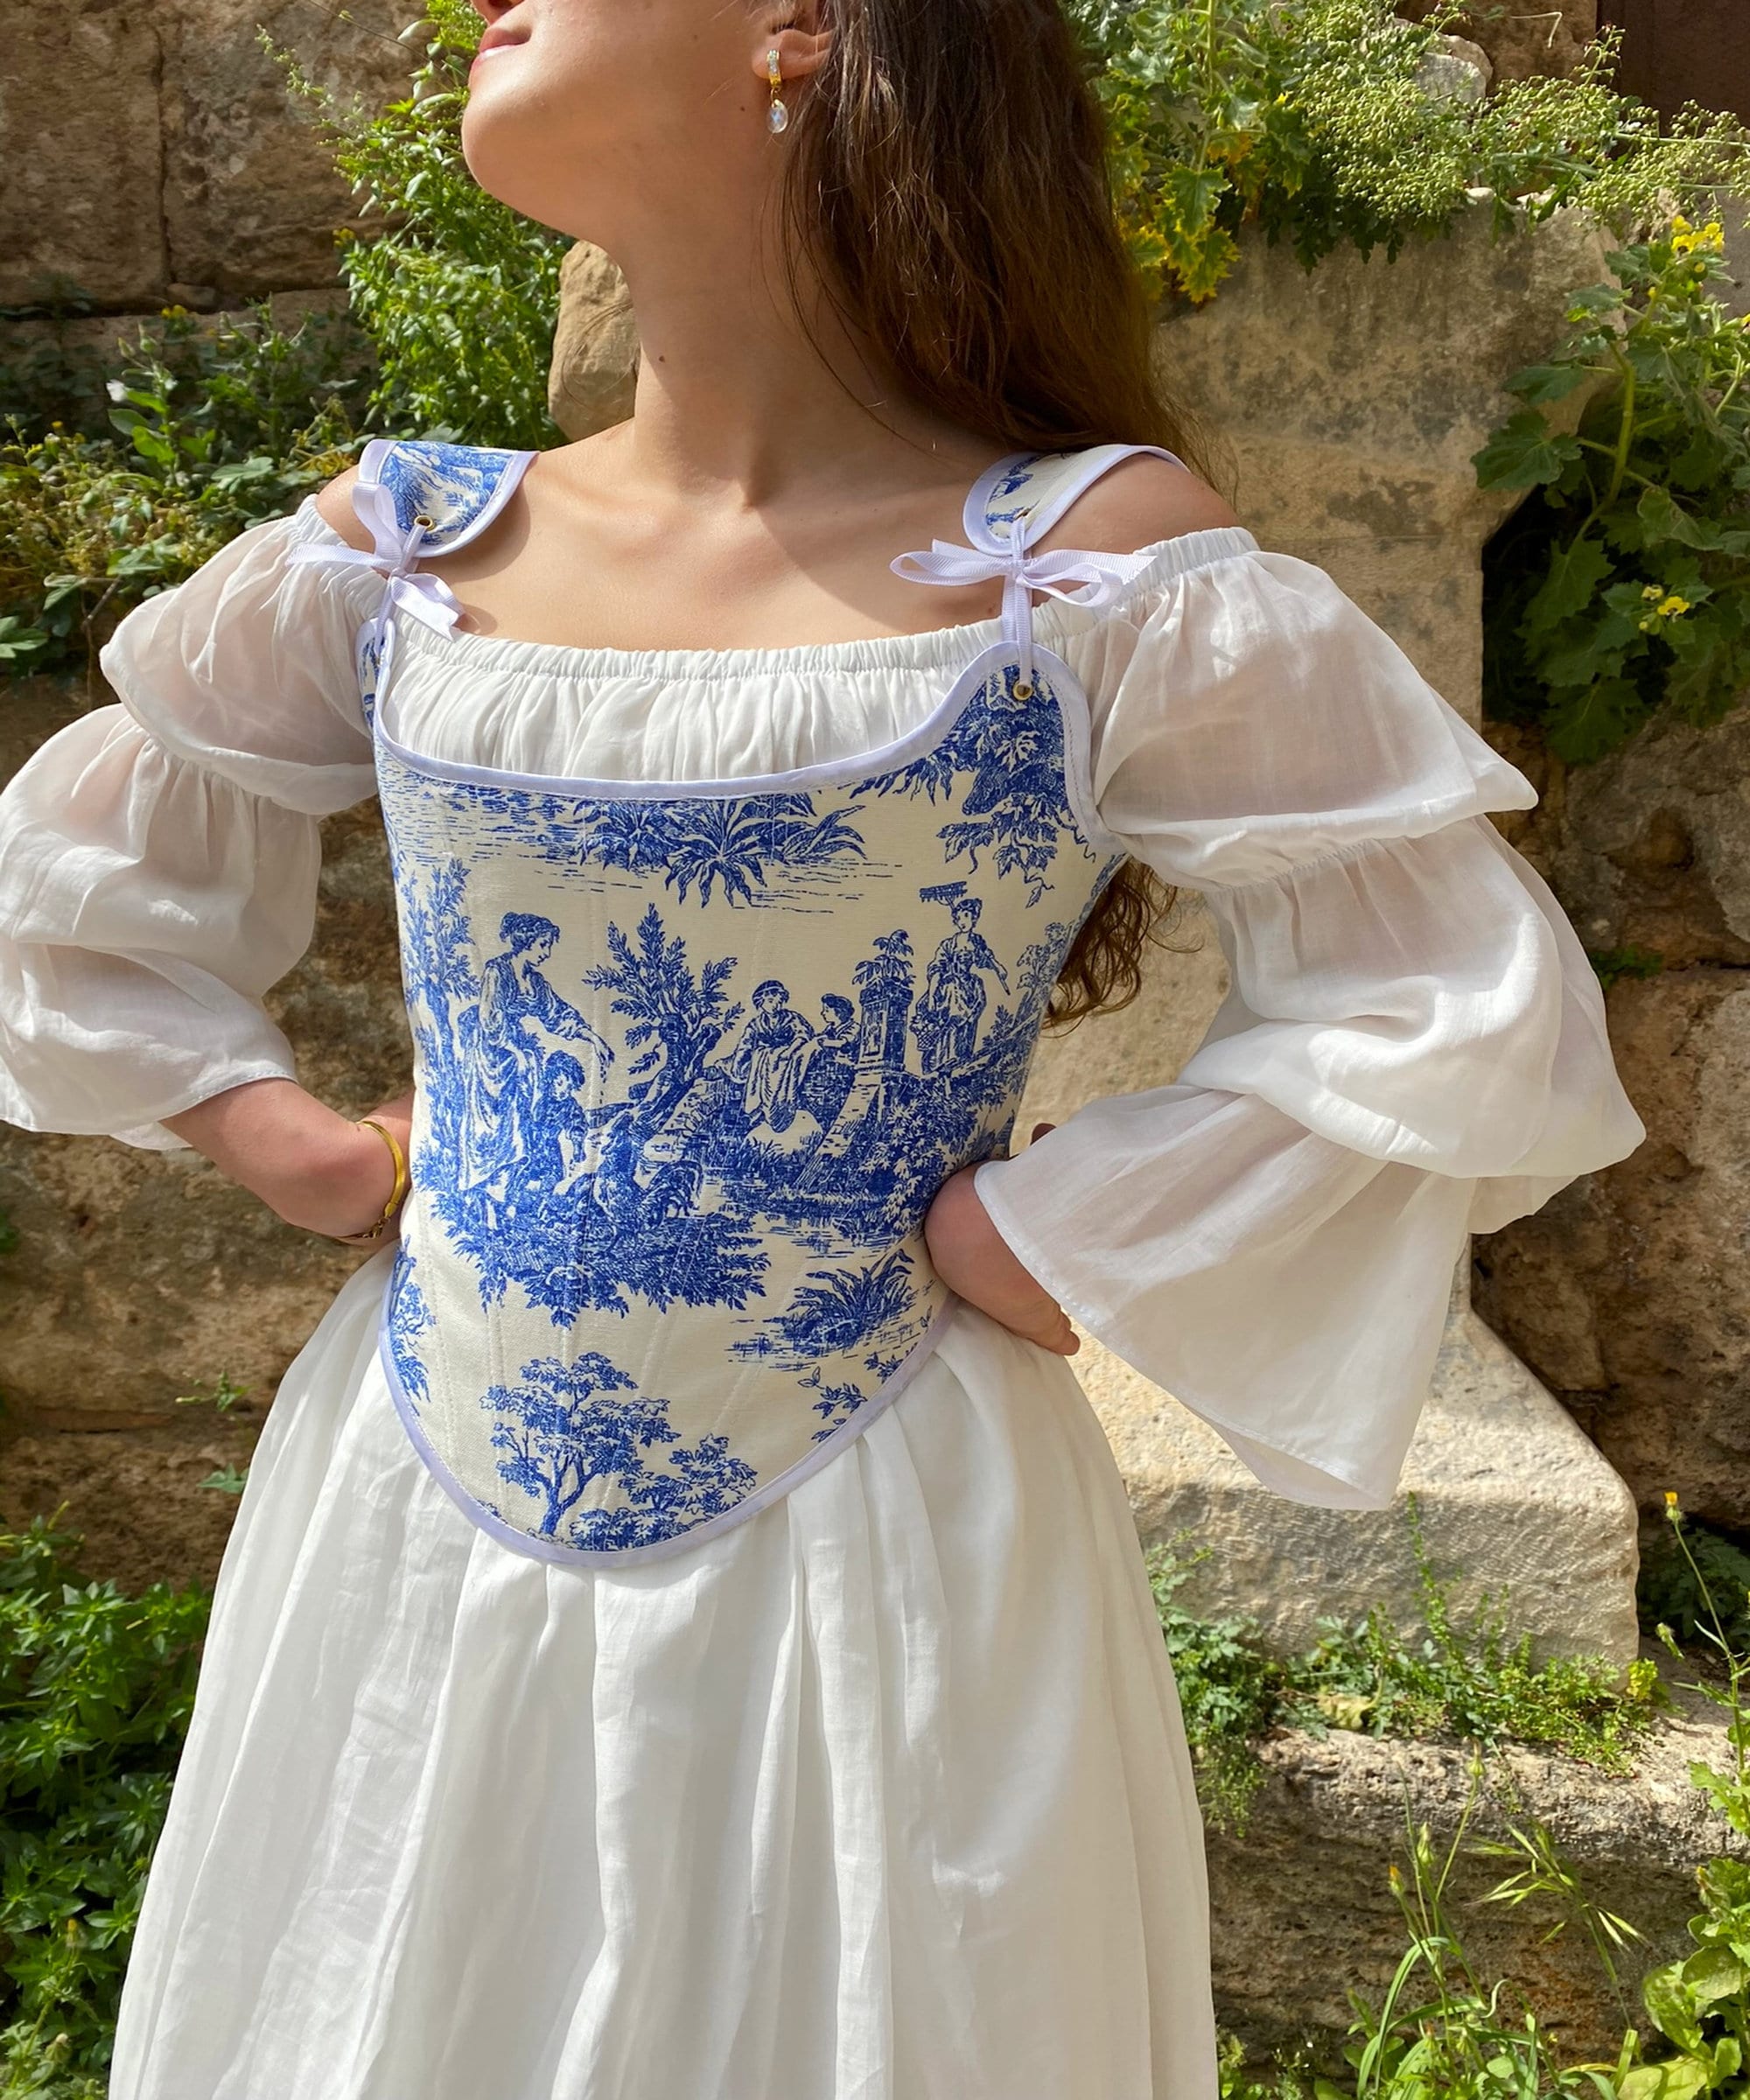 Buy Renaissance Corset Bodice in Blue and White, Ren Fair Corset,  Elizabethan Corset Stays, Cosplay Medieval Corset, Corset Top, Cottagecore  Online in India 